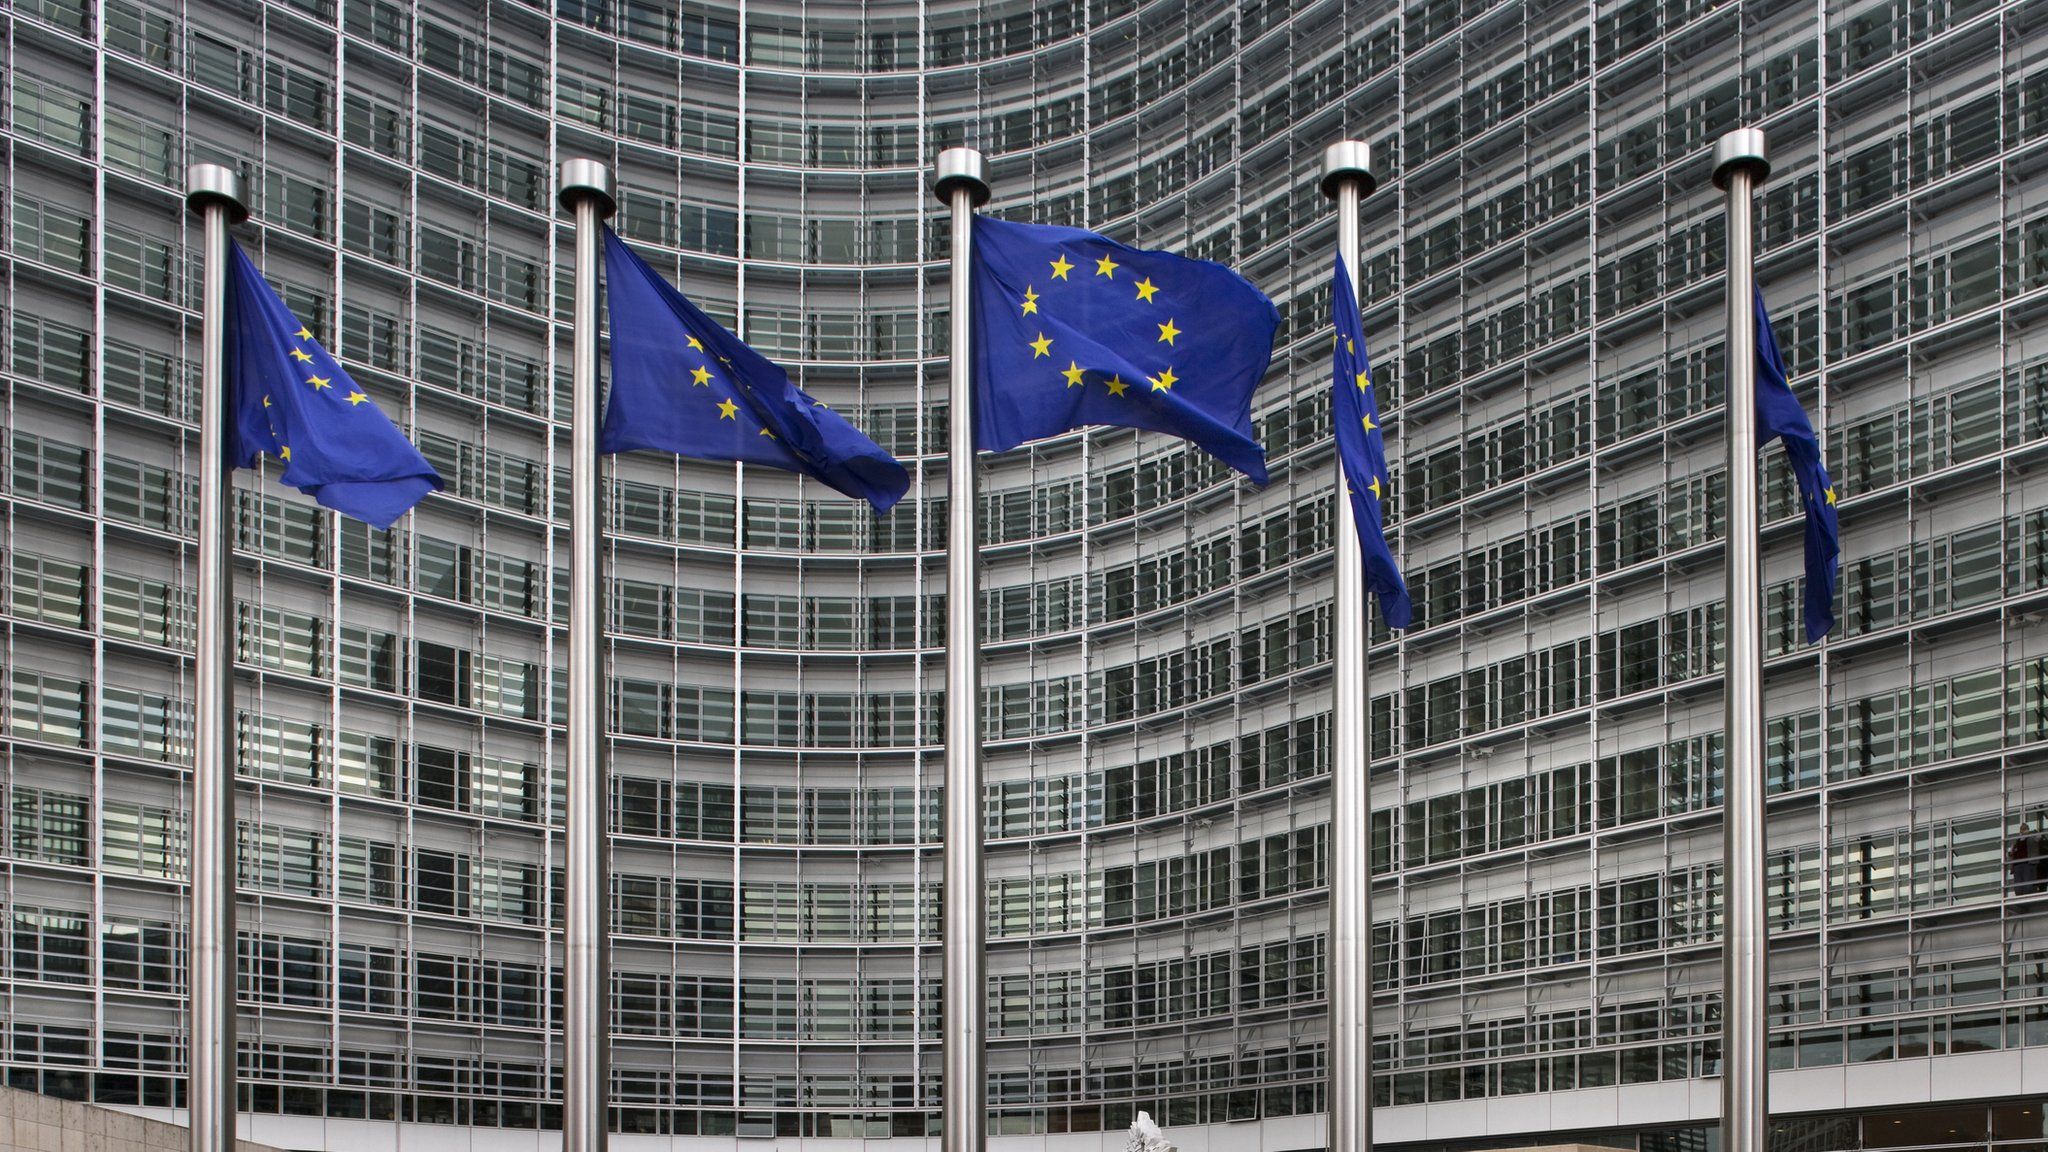 European Union flags next to the European Commission headquarters in Brussels